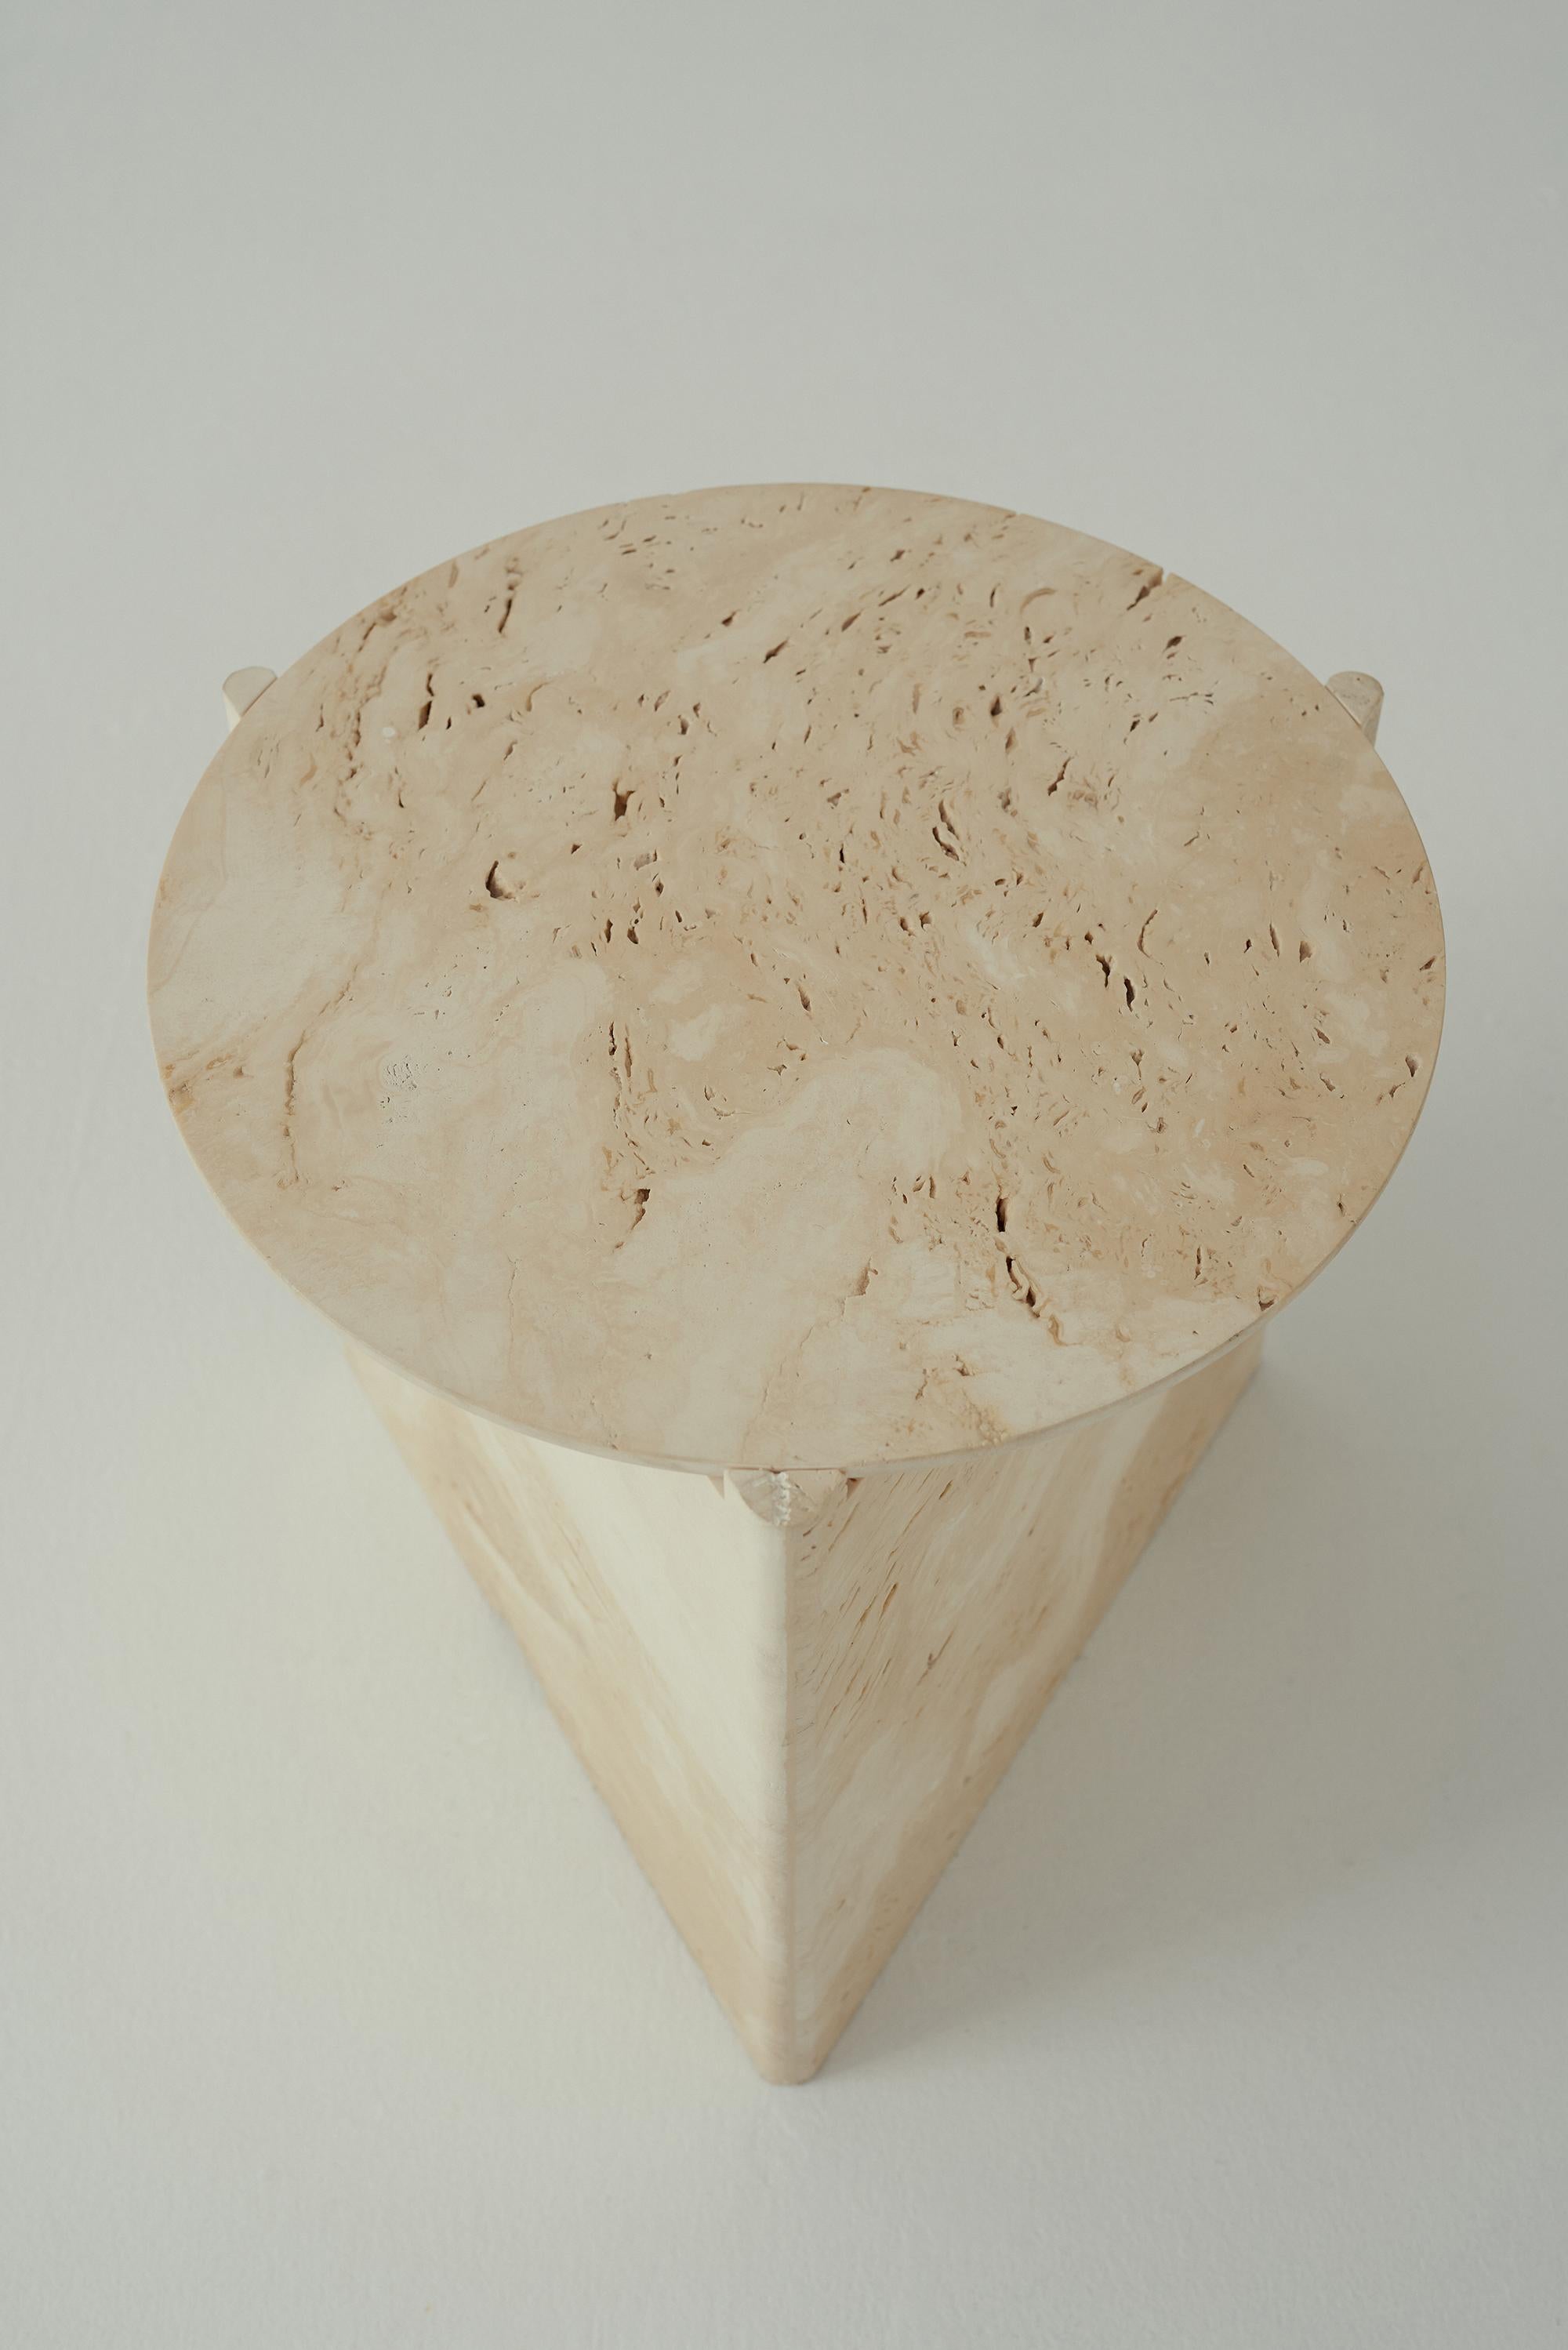 The Portsea side table celebrates elemental forms and quality craftmanship; a
reimagining of the Malibu Side Table in figured natural stone.

Travertine gives tactile dimension to the table’s circular and triangulated forms, with fine stone